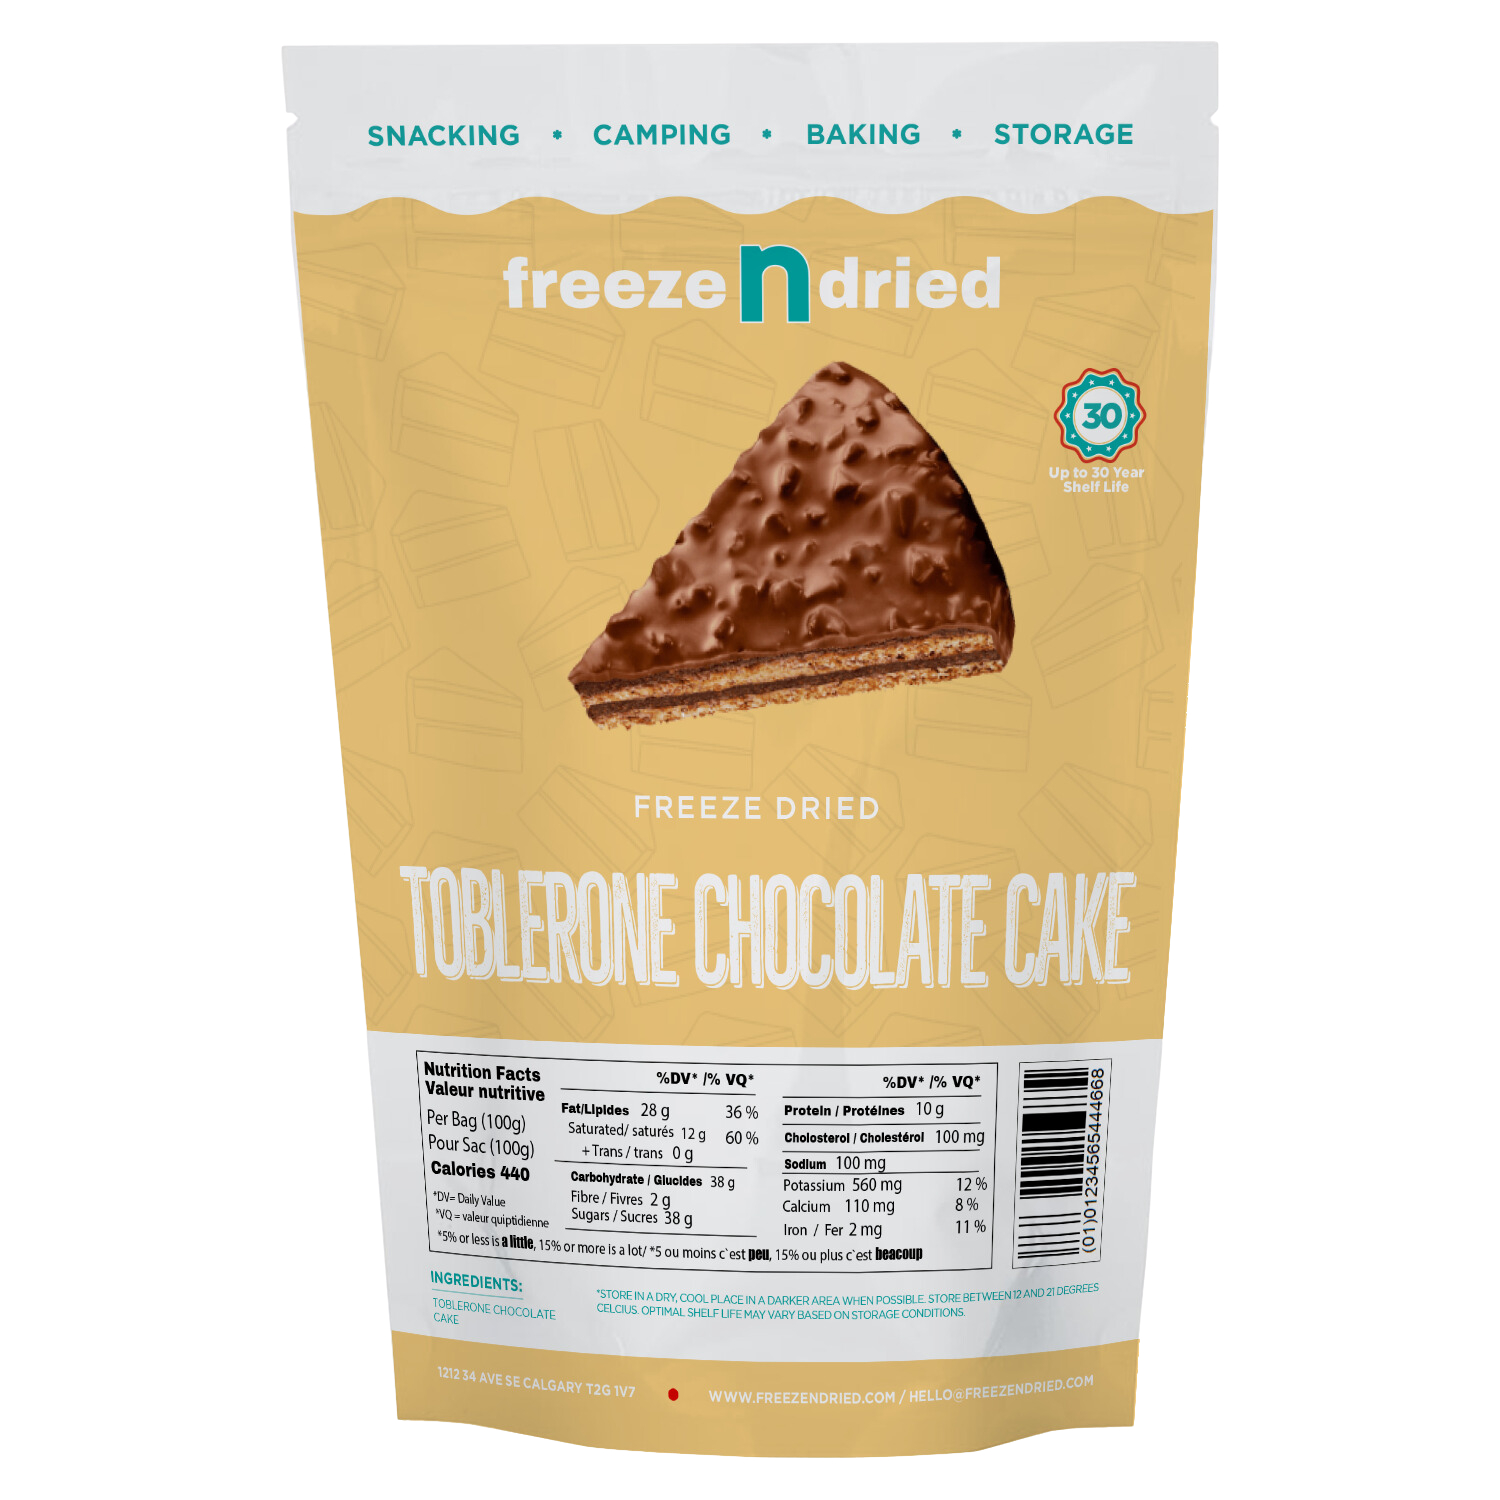 Discover the Ultimate Indulgence: Freeze-Dried Toblerone Chocolate Cake!